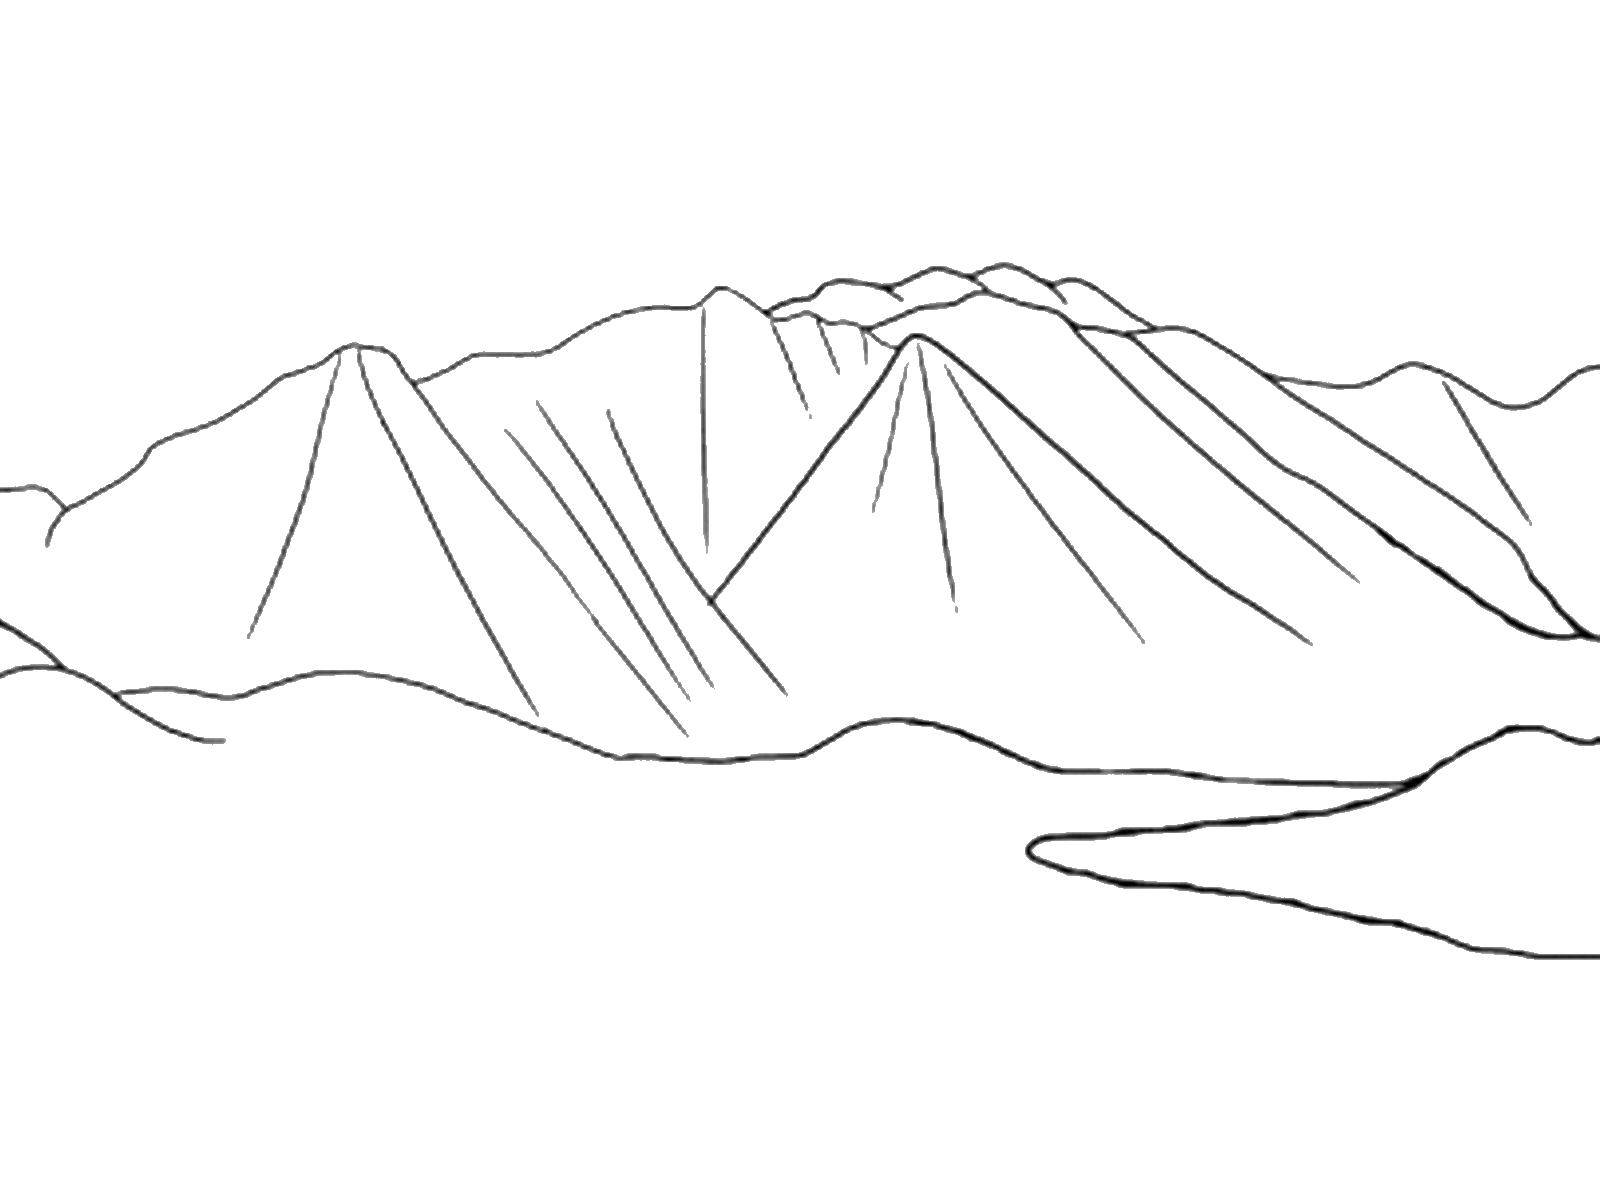 Coloring Mountains. Category Nature. Tags:  mountains.